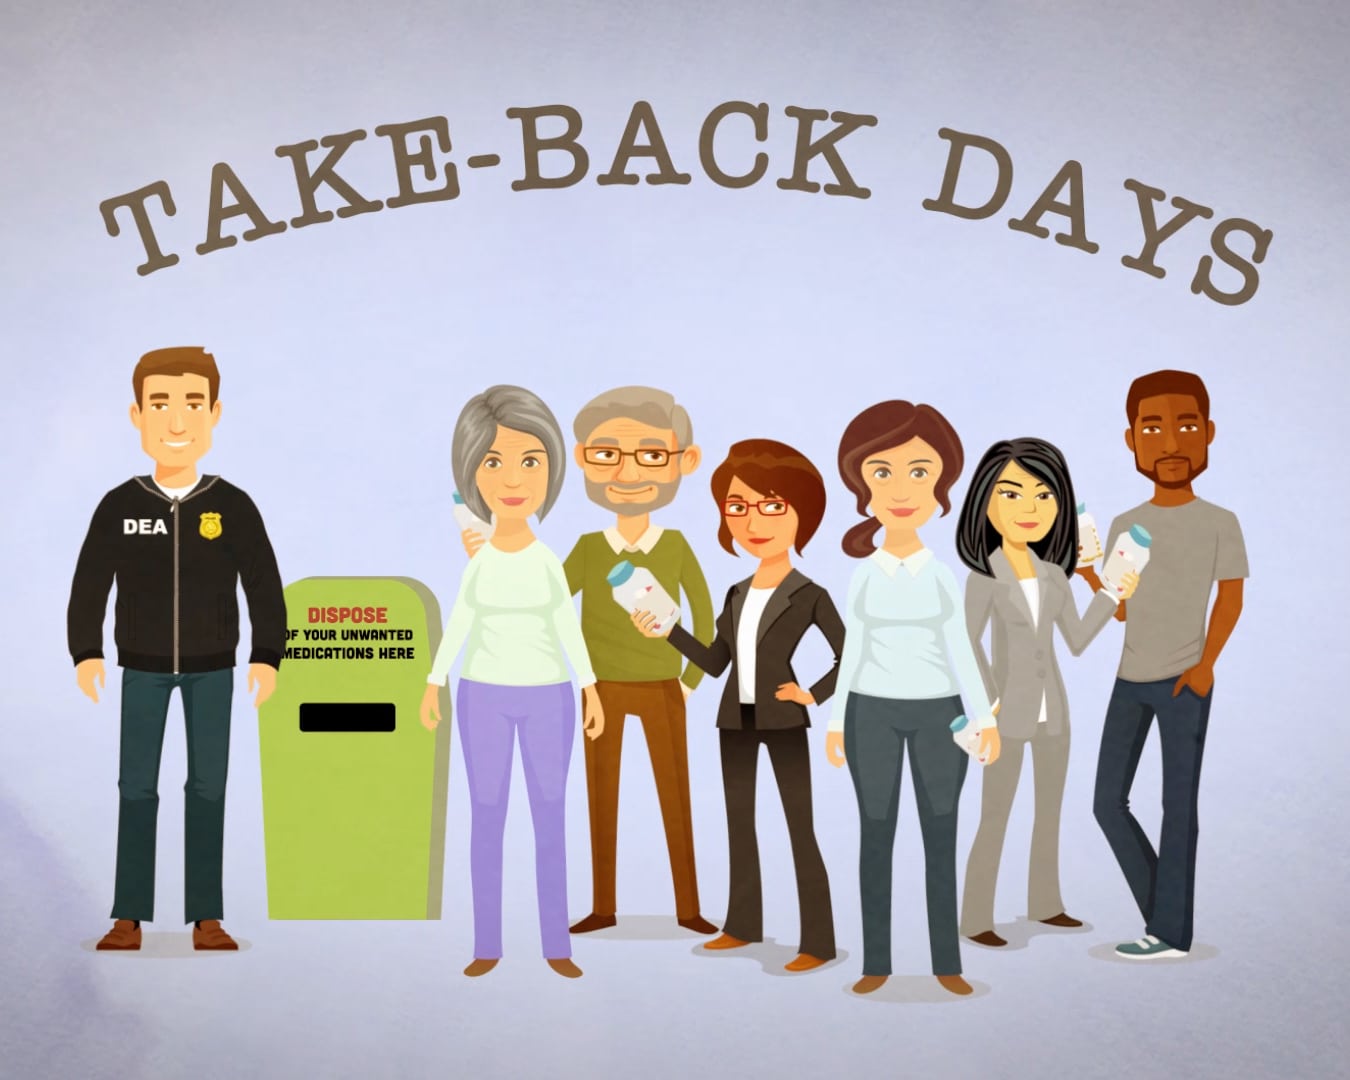 Cartoon figures at disposal box with text "take-back days."